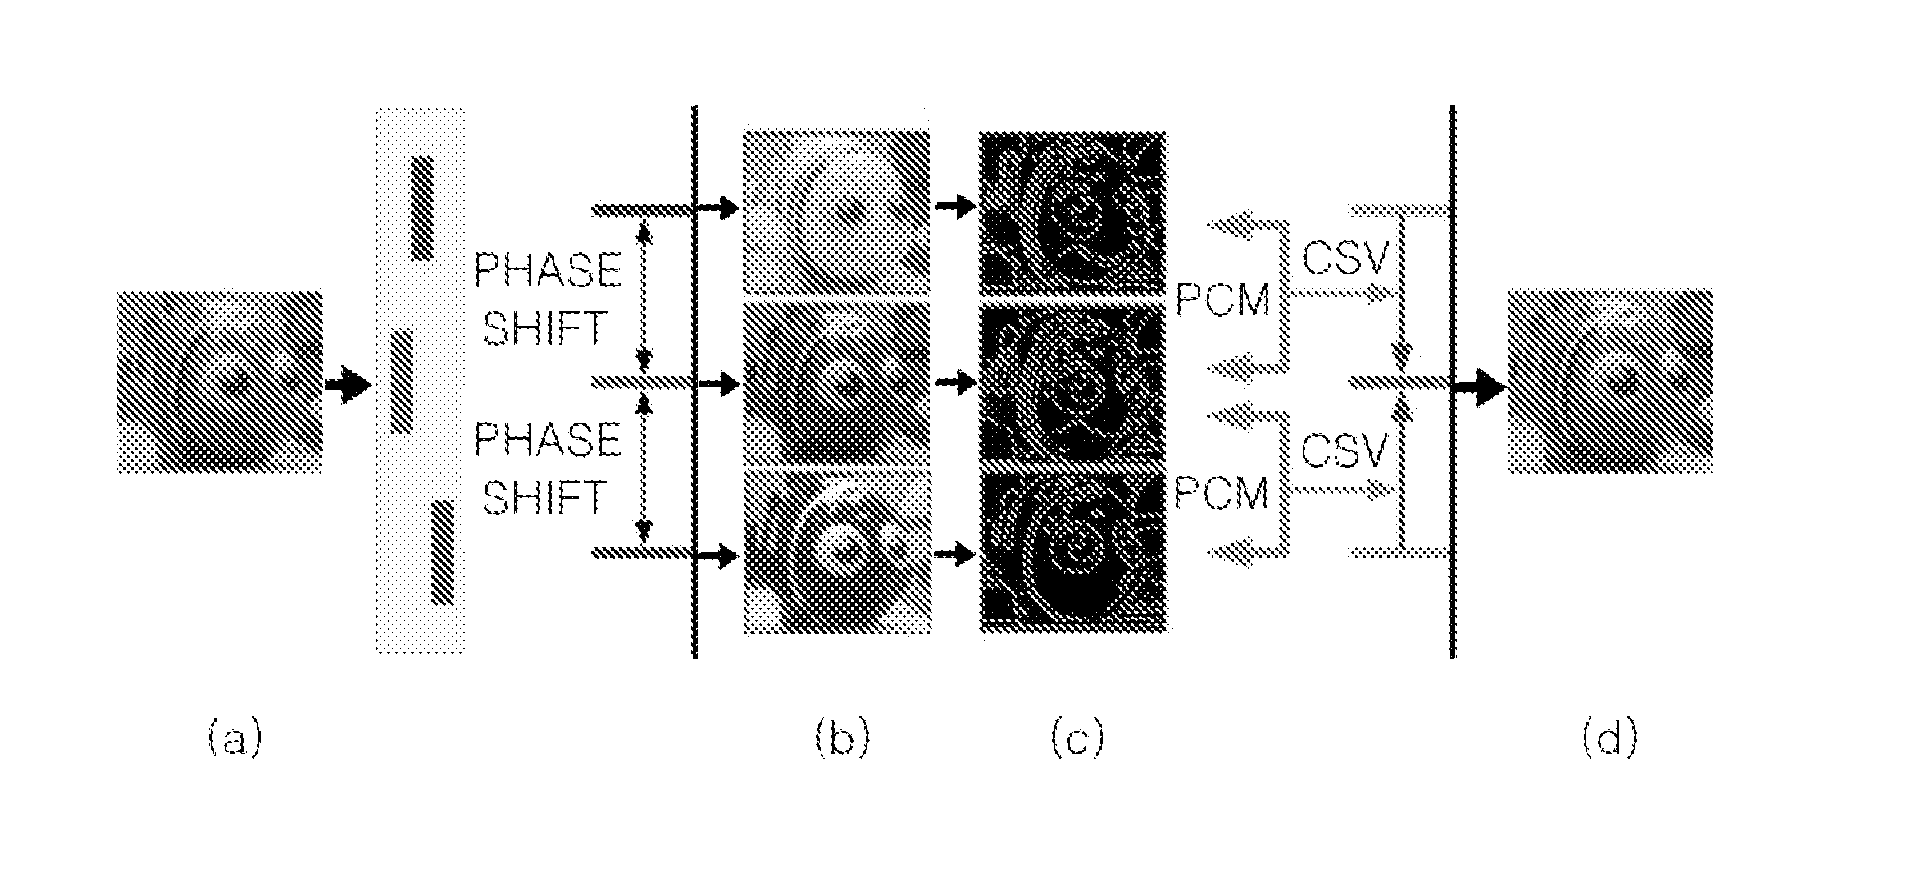 Apparatus and method for aligning color channels